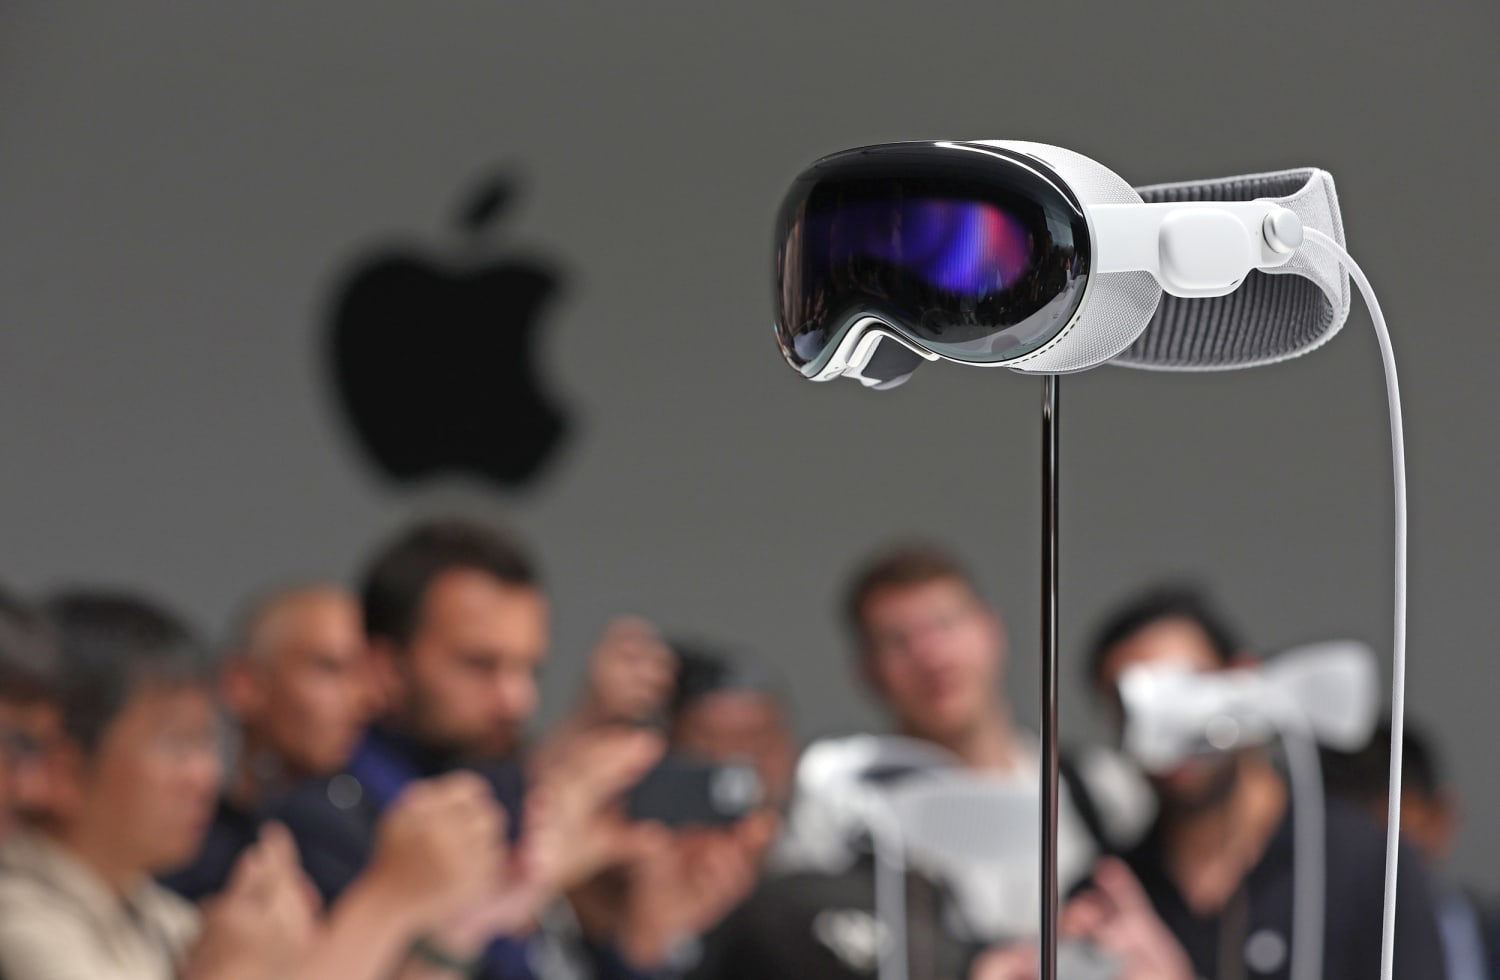 Apple’s entry into VR is a ‘watershed moment,’ say top industry execs